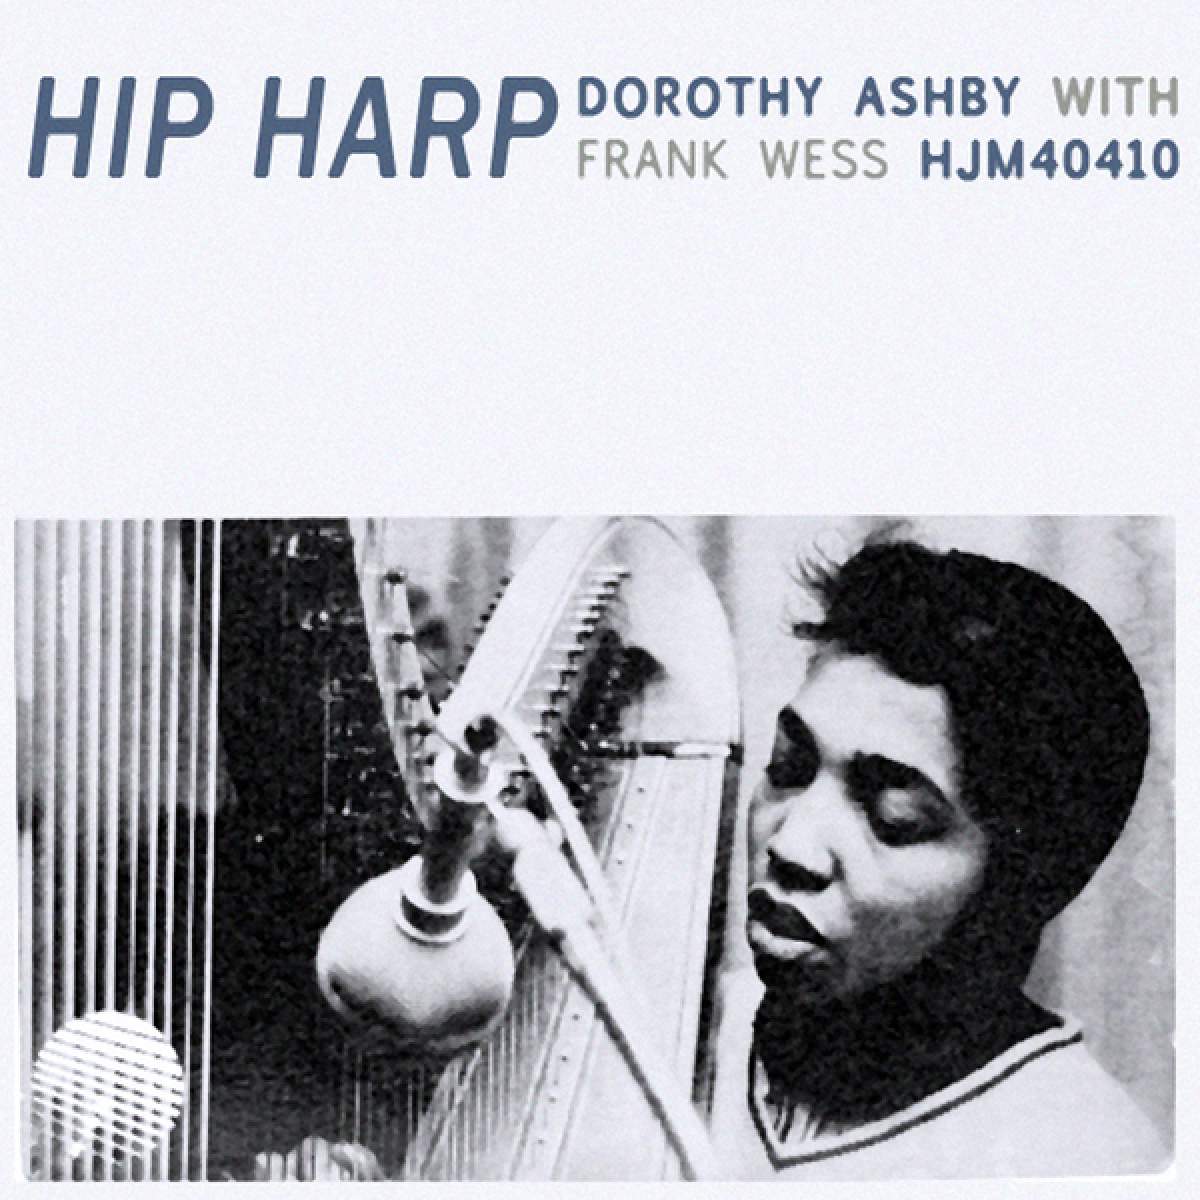 Cover of Dorothy Ashby's Hip Harp LP